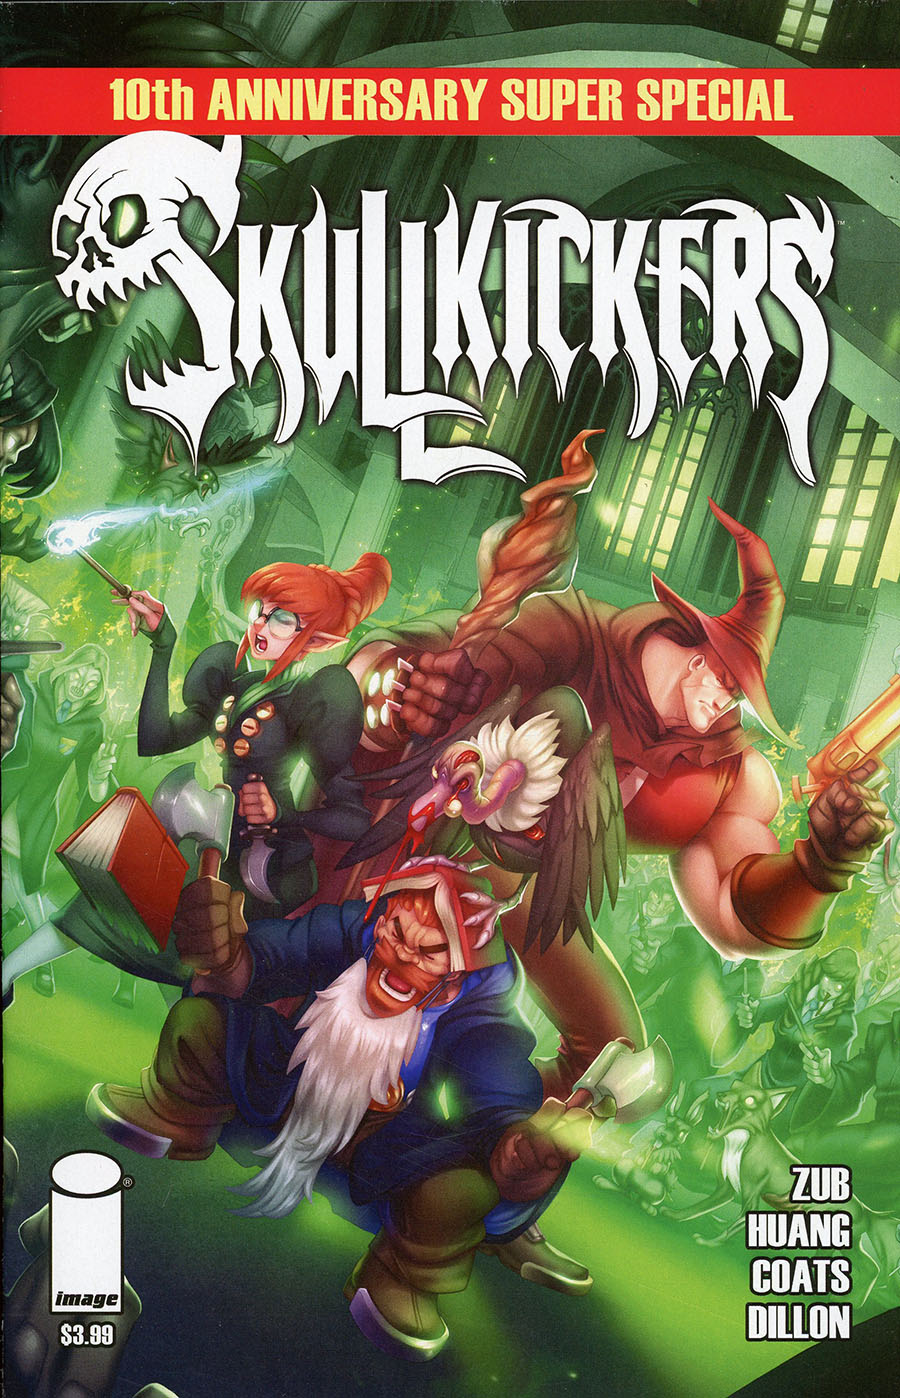 Skullkickers 10th Anniversary Super Special #1 (One Shot)